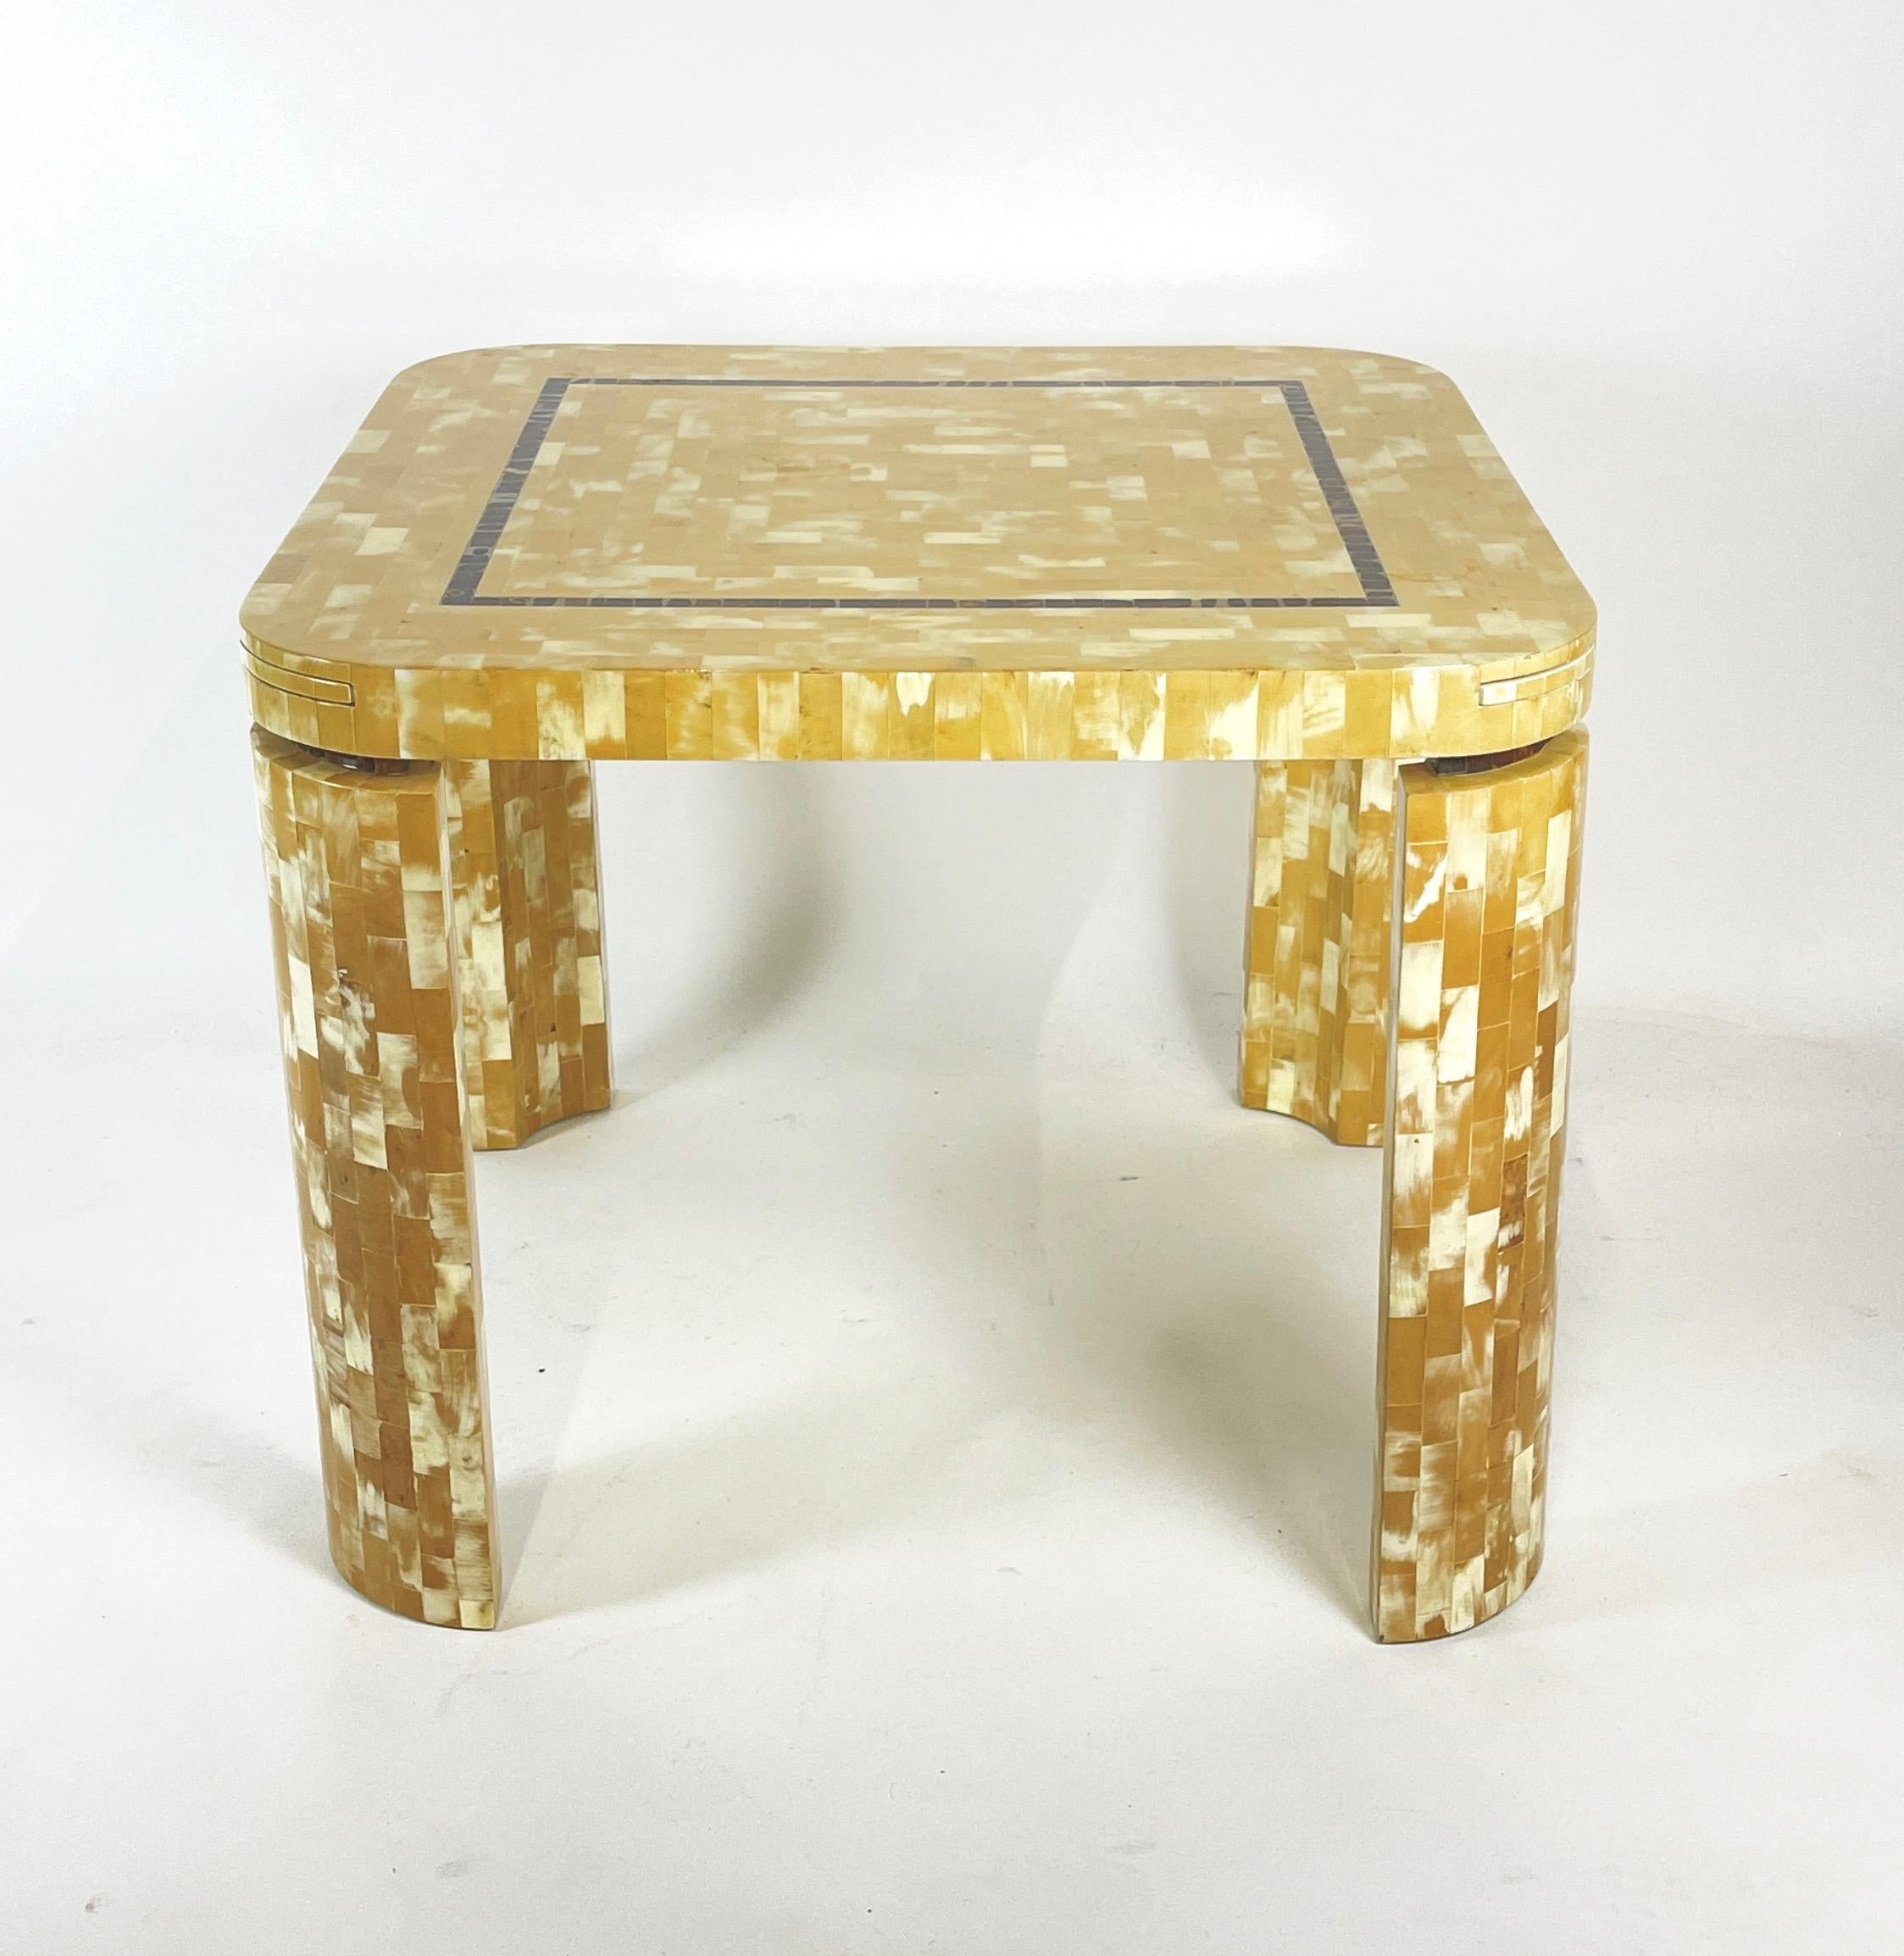 Amazingly decorative and chic game table designed by Enrique Garcel for Jimeco. This table is oddly reminiscent of both the clean sleek lines of Karl Springer while echoing the patchwork design of Paul Evans. This piece retains the original tags